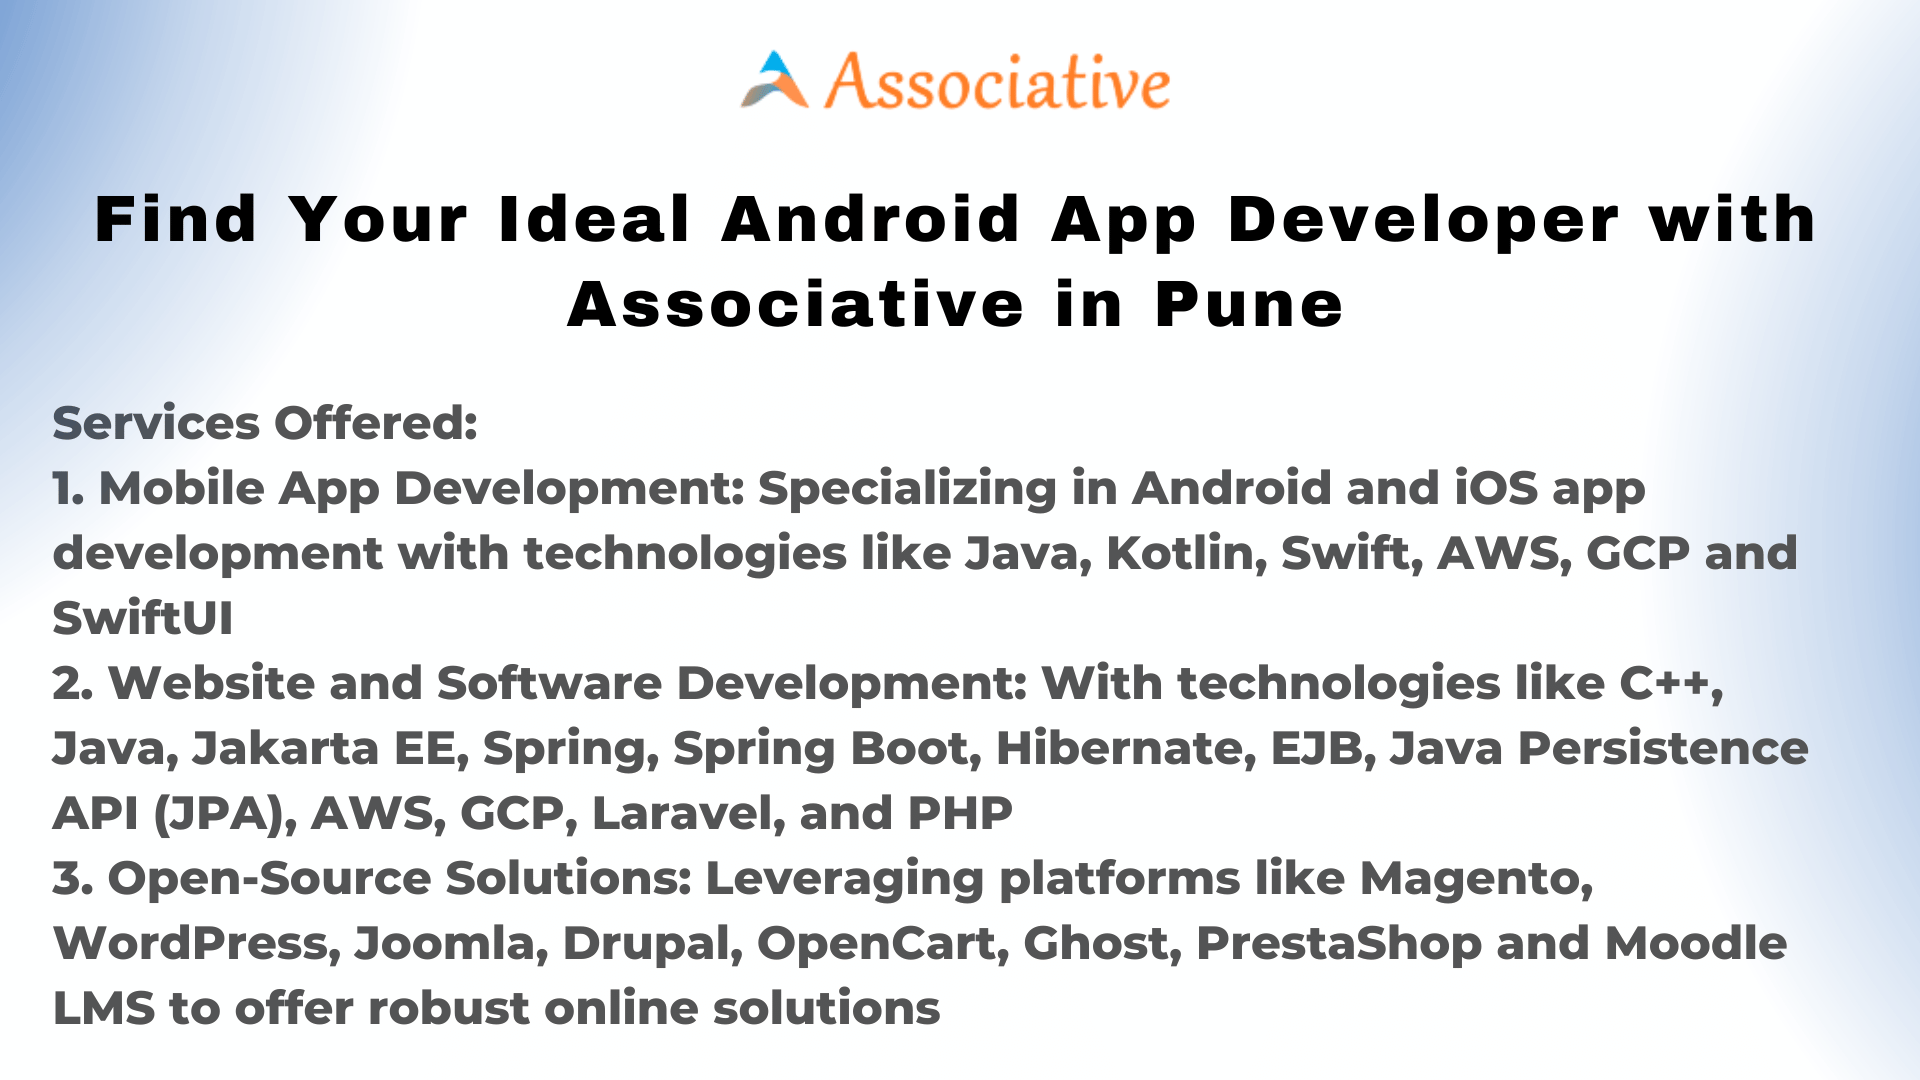 Find Your Ideal Android App Developer with Associative in Pune